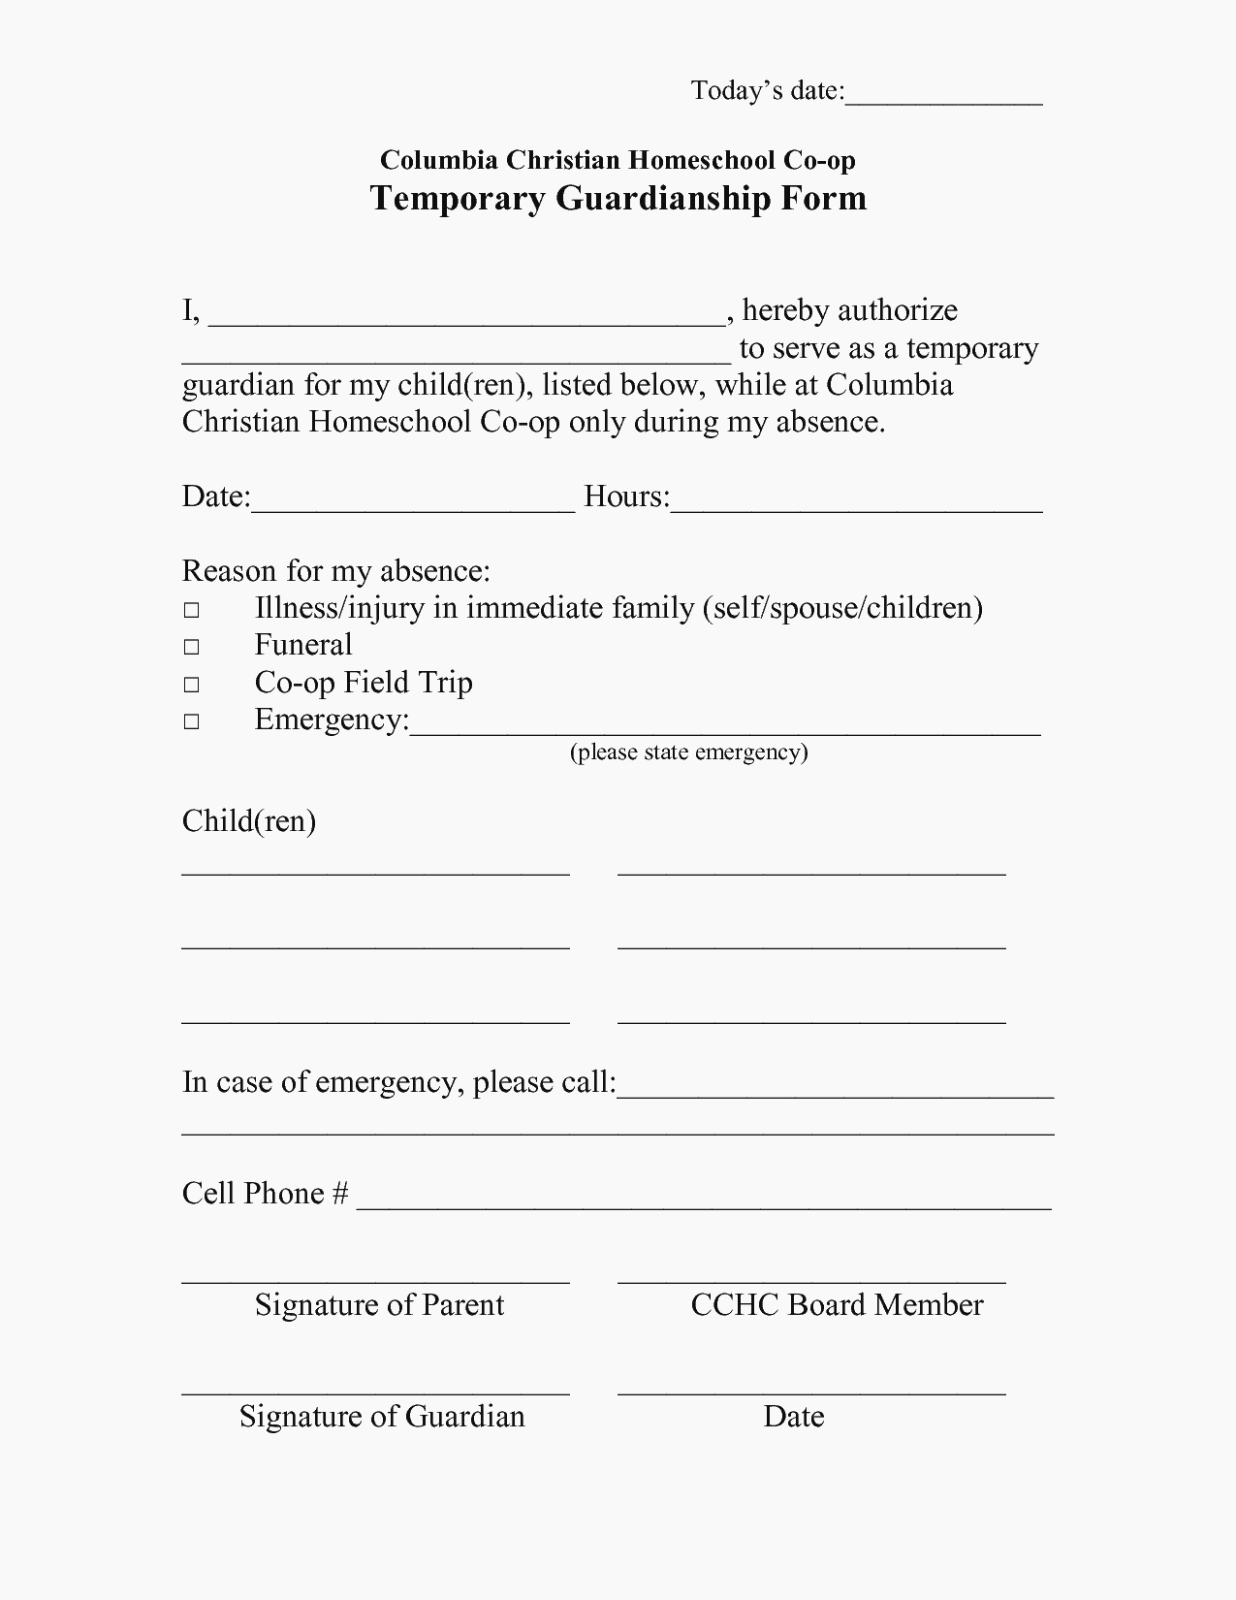 Free Temporary Guardianship form Template Luxury the 15 Steps Needed for